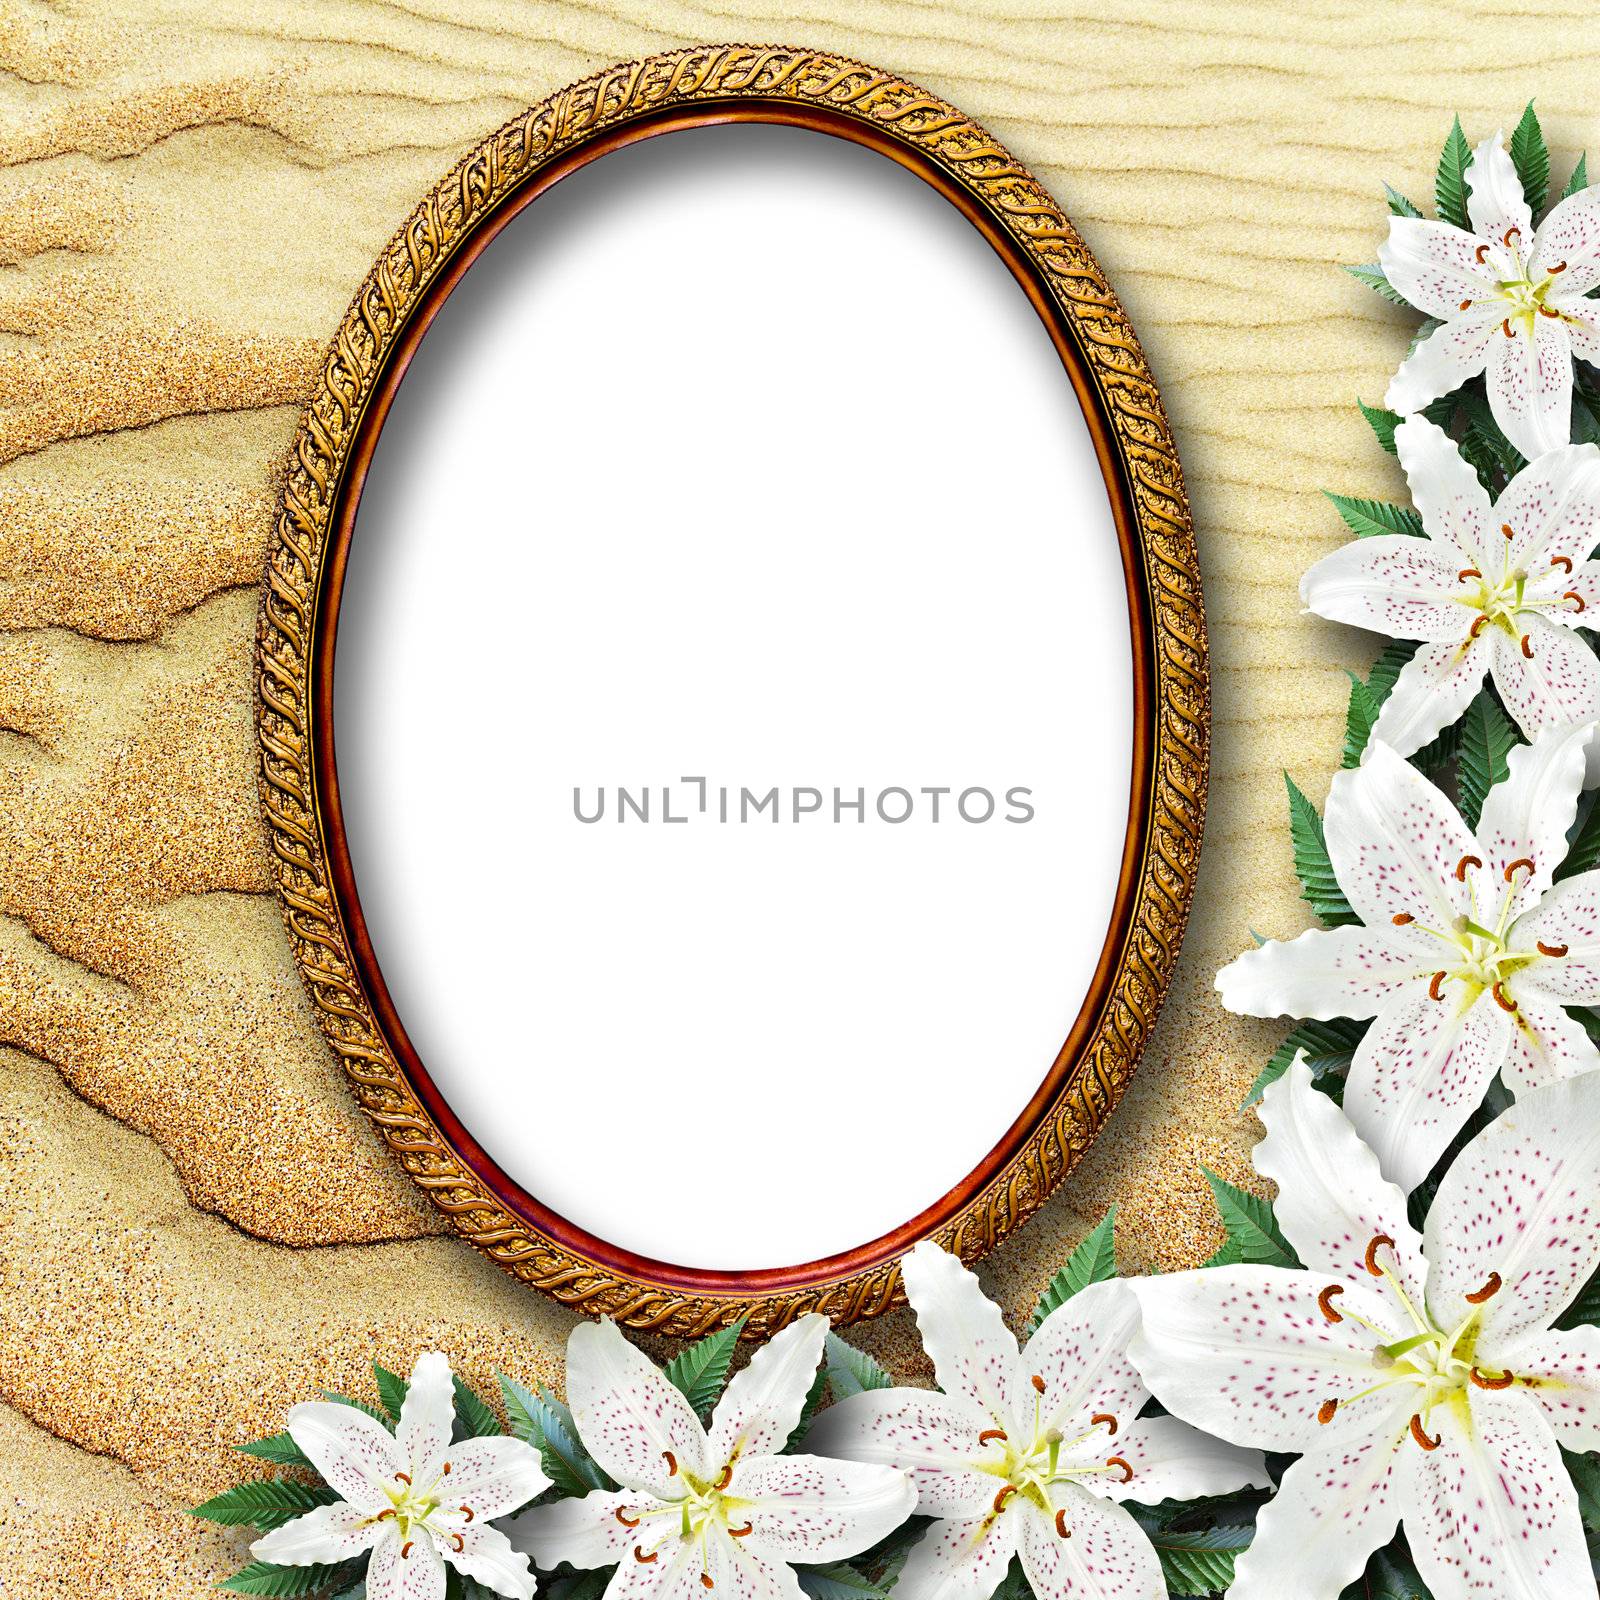 frame for a picture with flowers lilies on a background of sand dunes